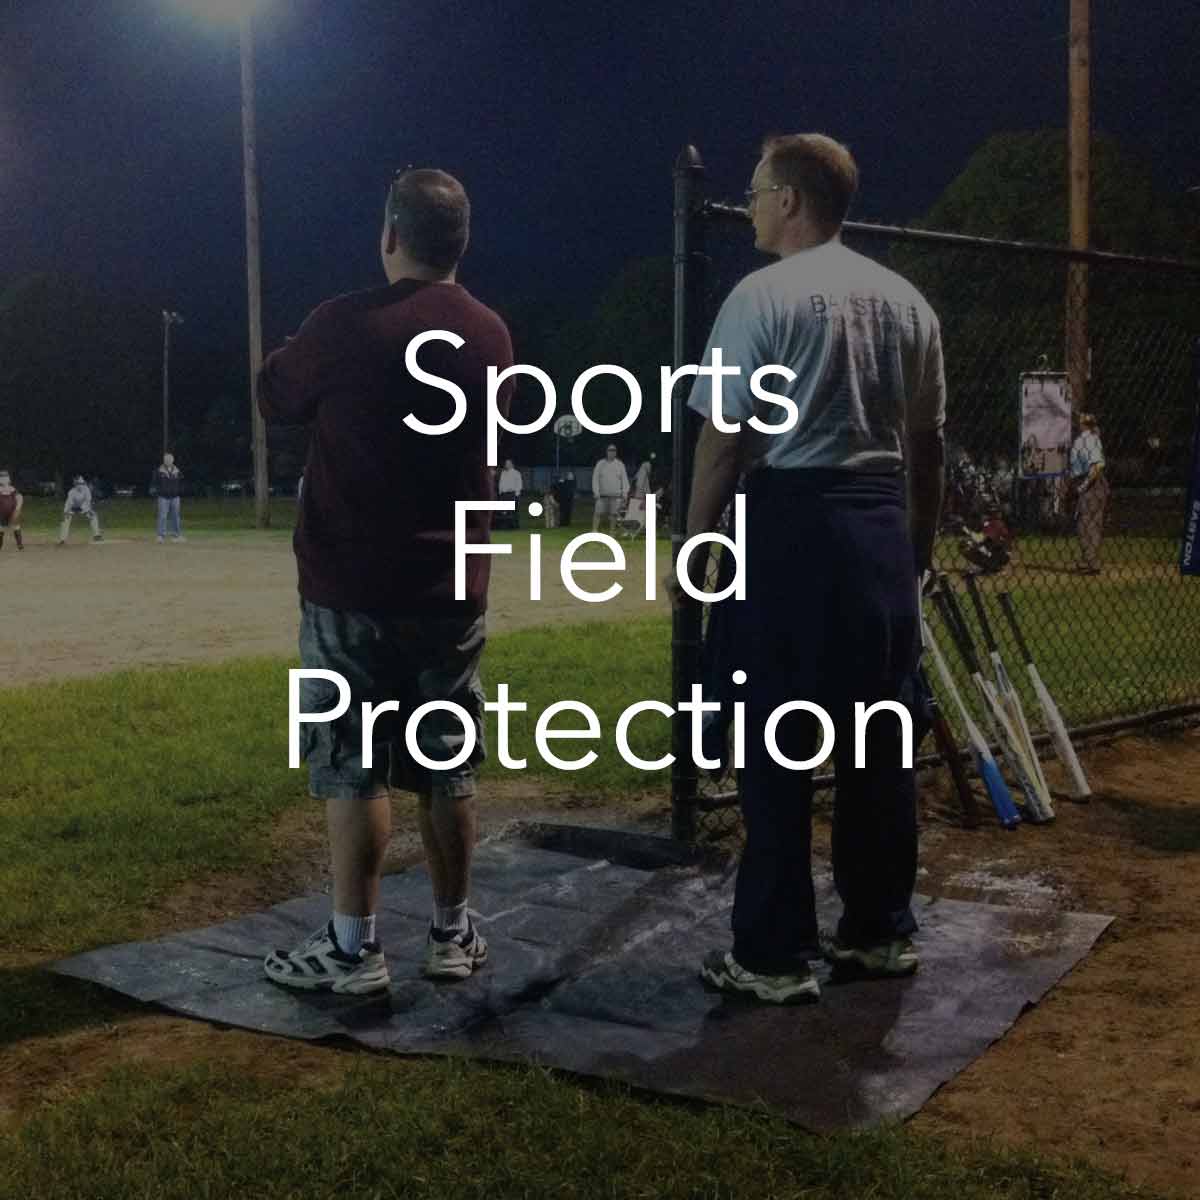 Sports Field protections